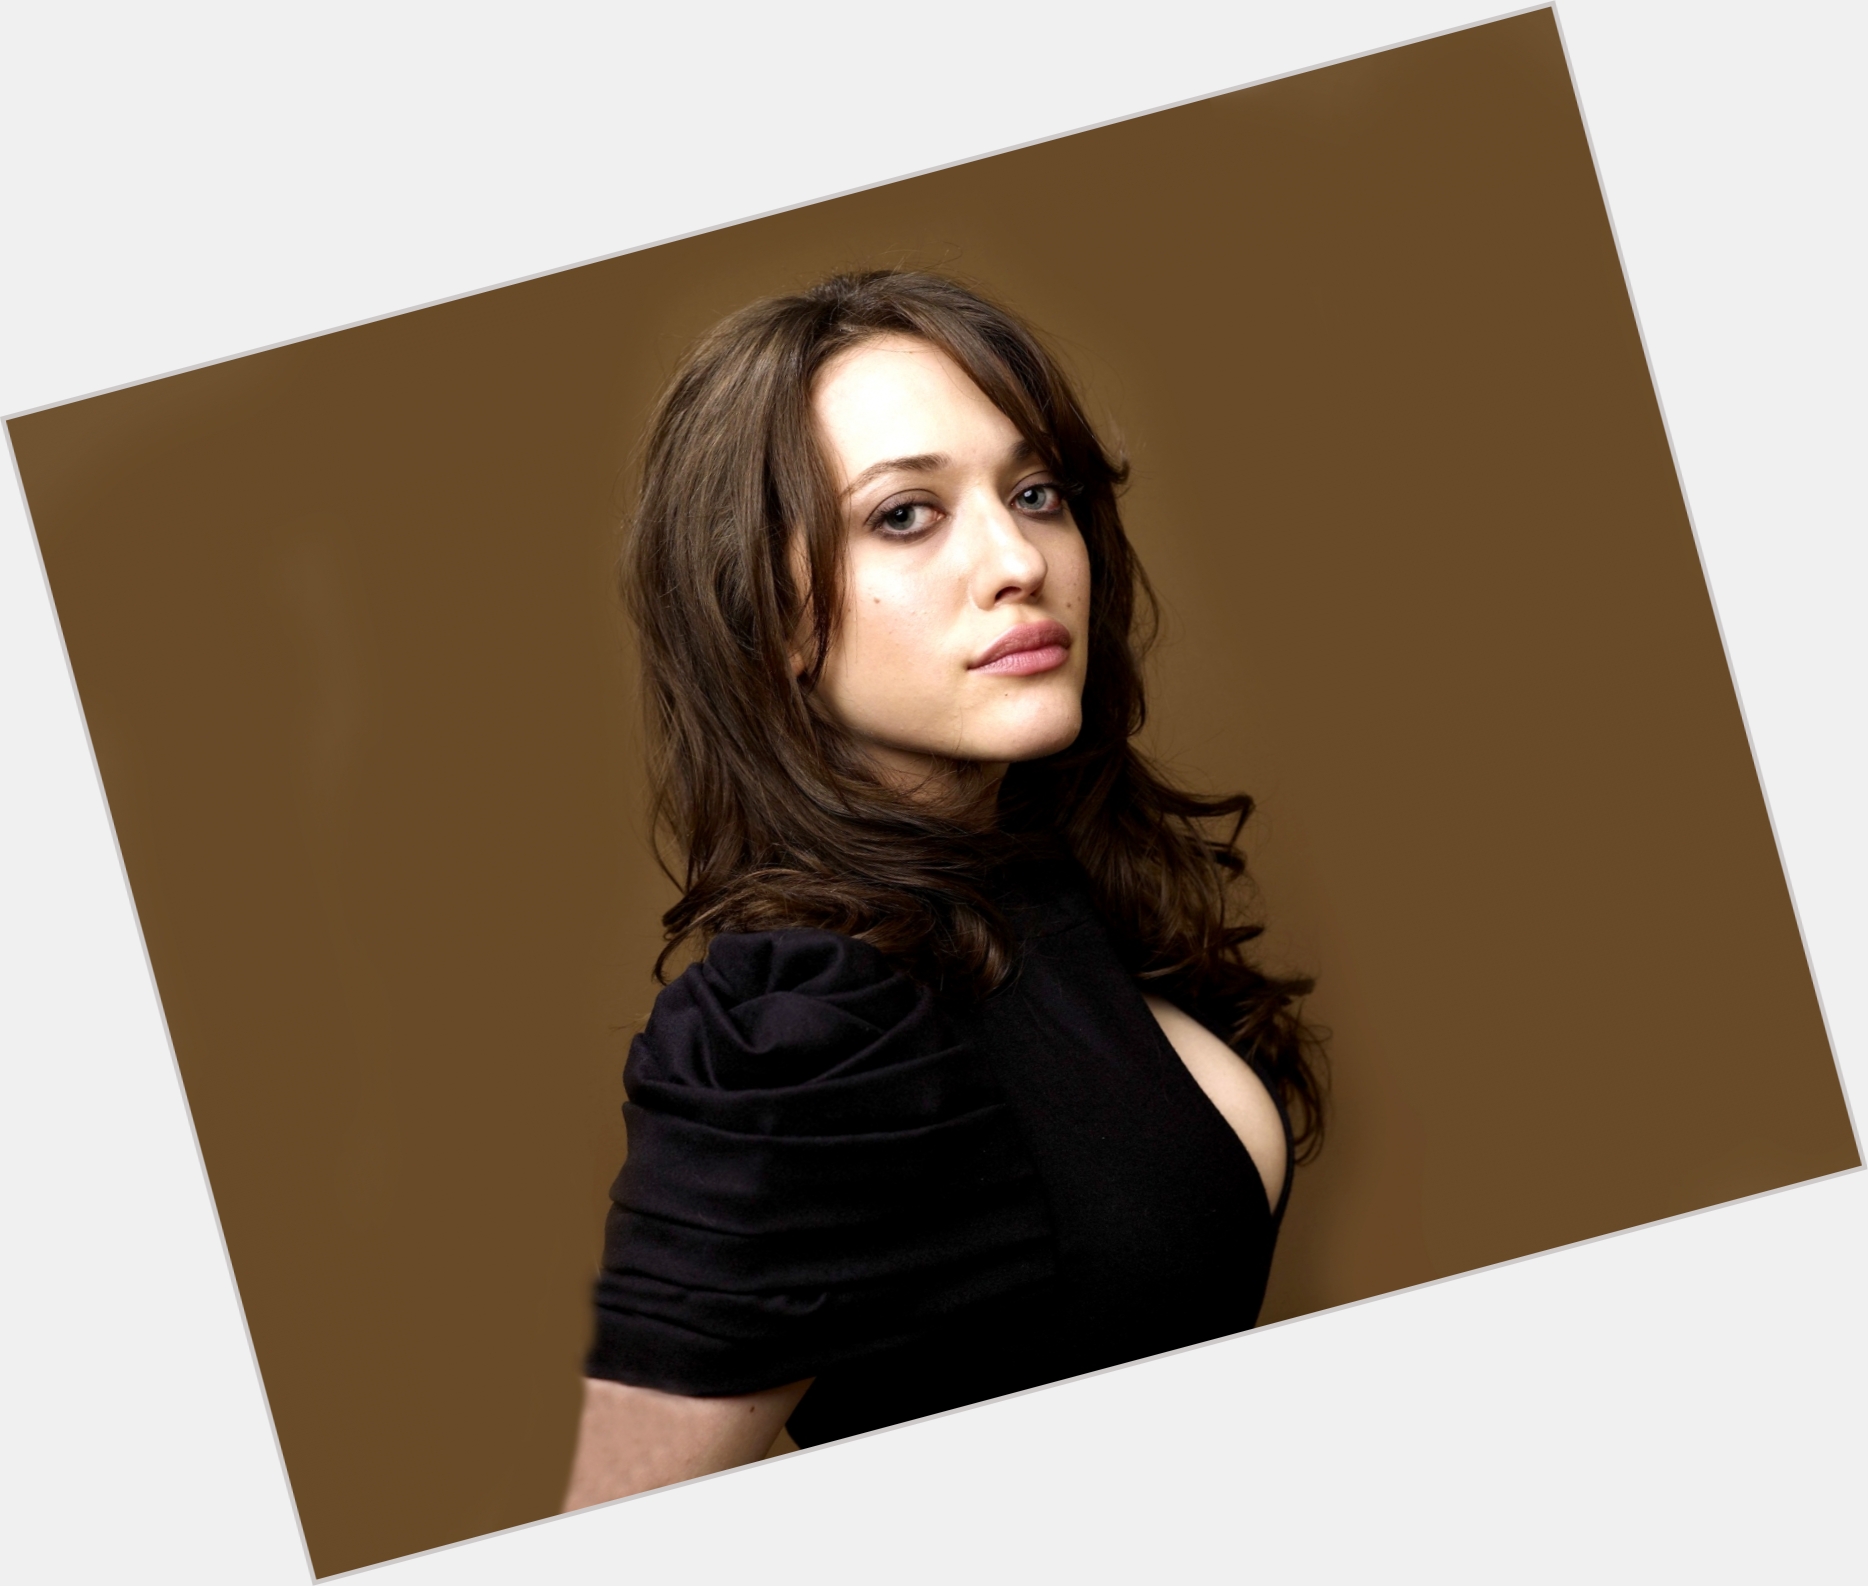 kat dennings weight before and after 2.jpg